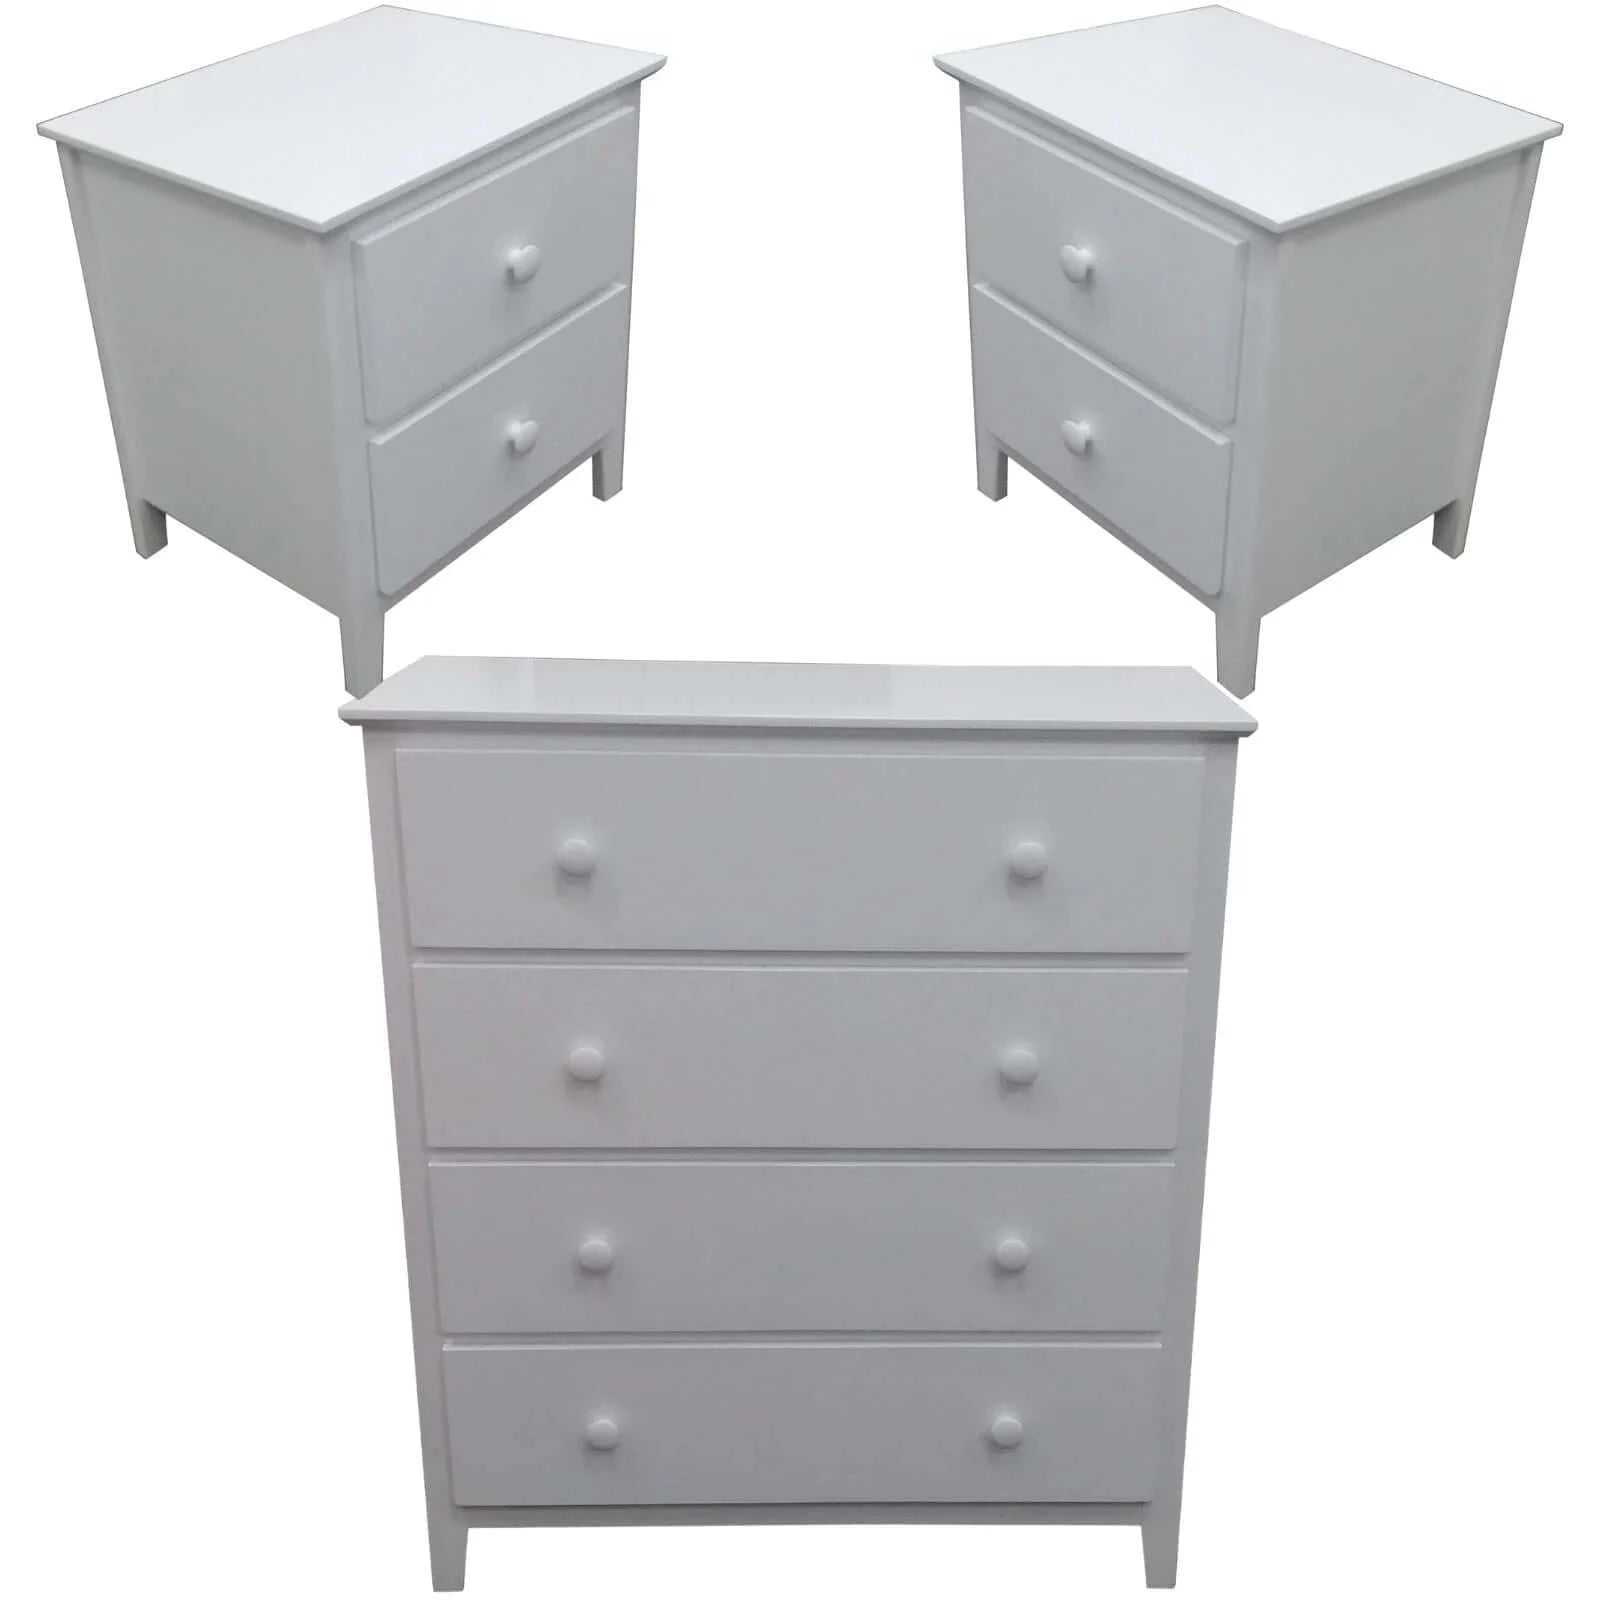 Buy wisteria bedside tallboy 3pc bedroom set drawers nightstand storage cabinet -wht - upinteriors-Upinteriors